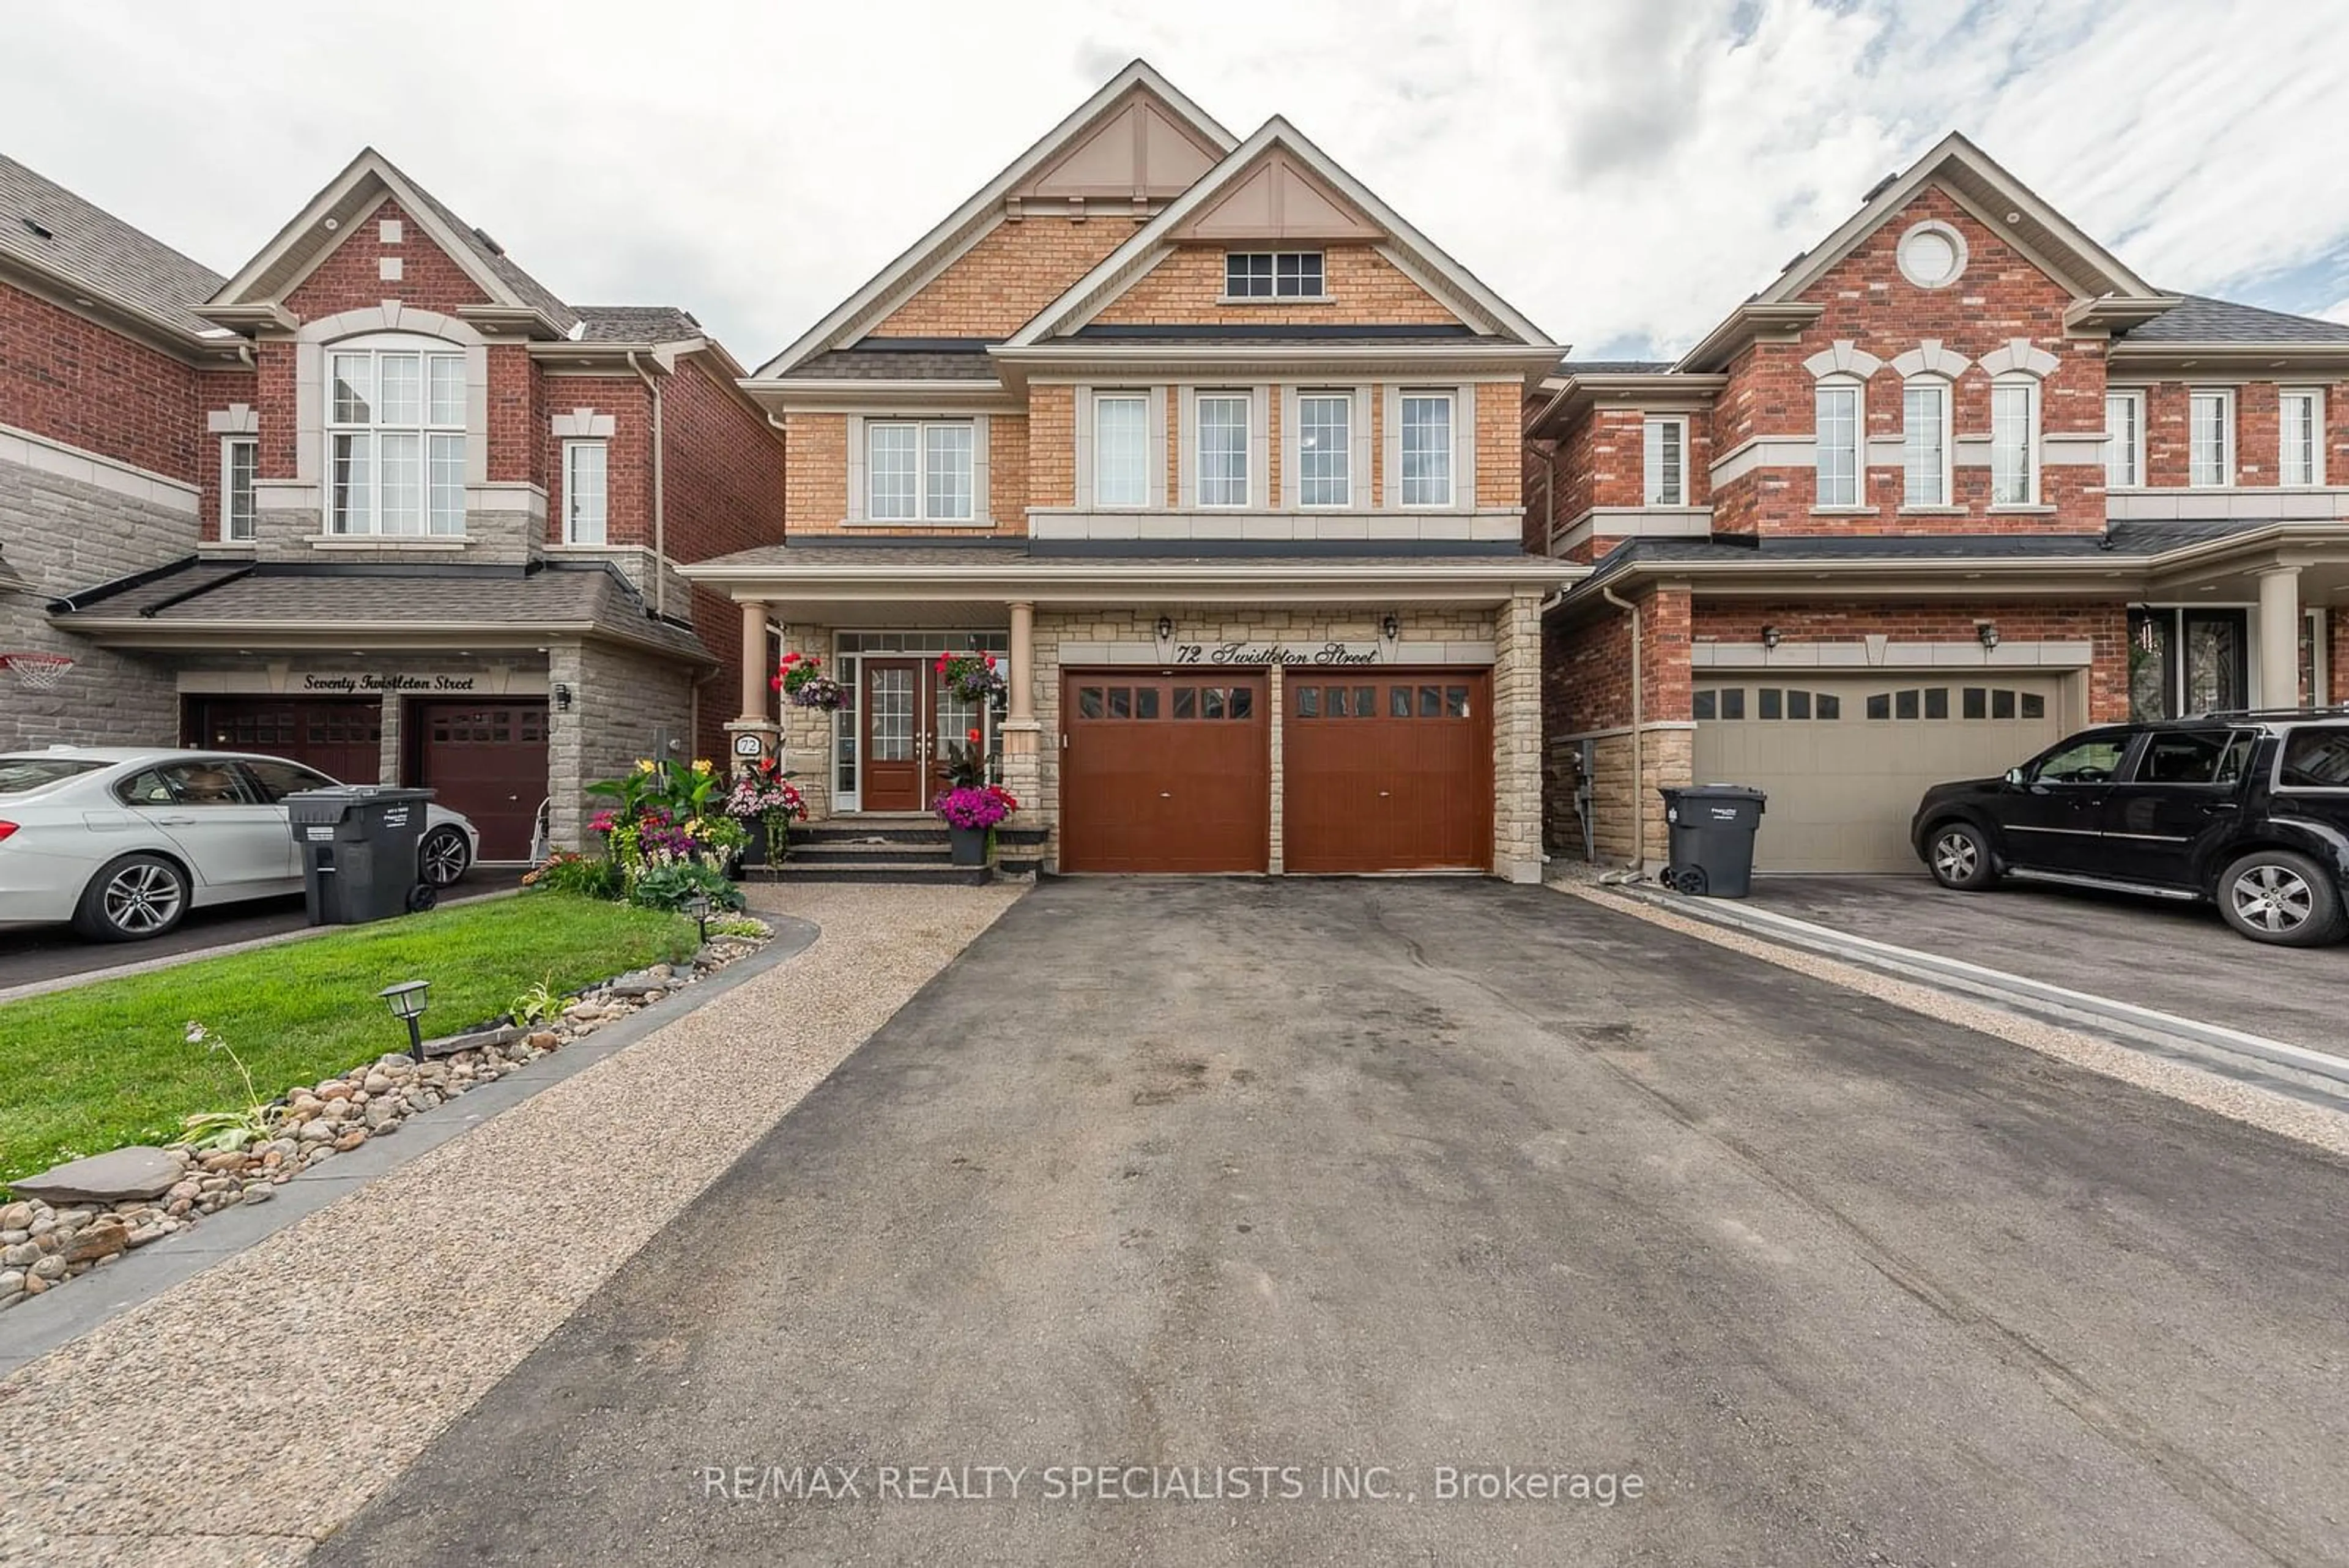 Frontside or backside of a home for 72 TWISTLETON St, Caledon Ontario L7C 4B5